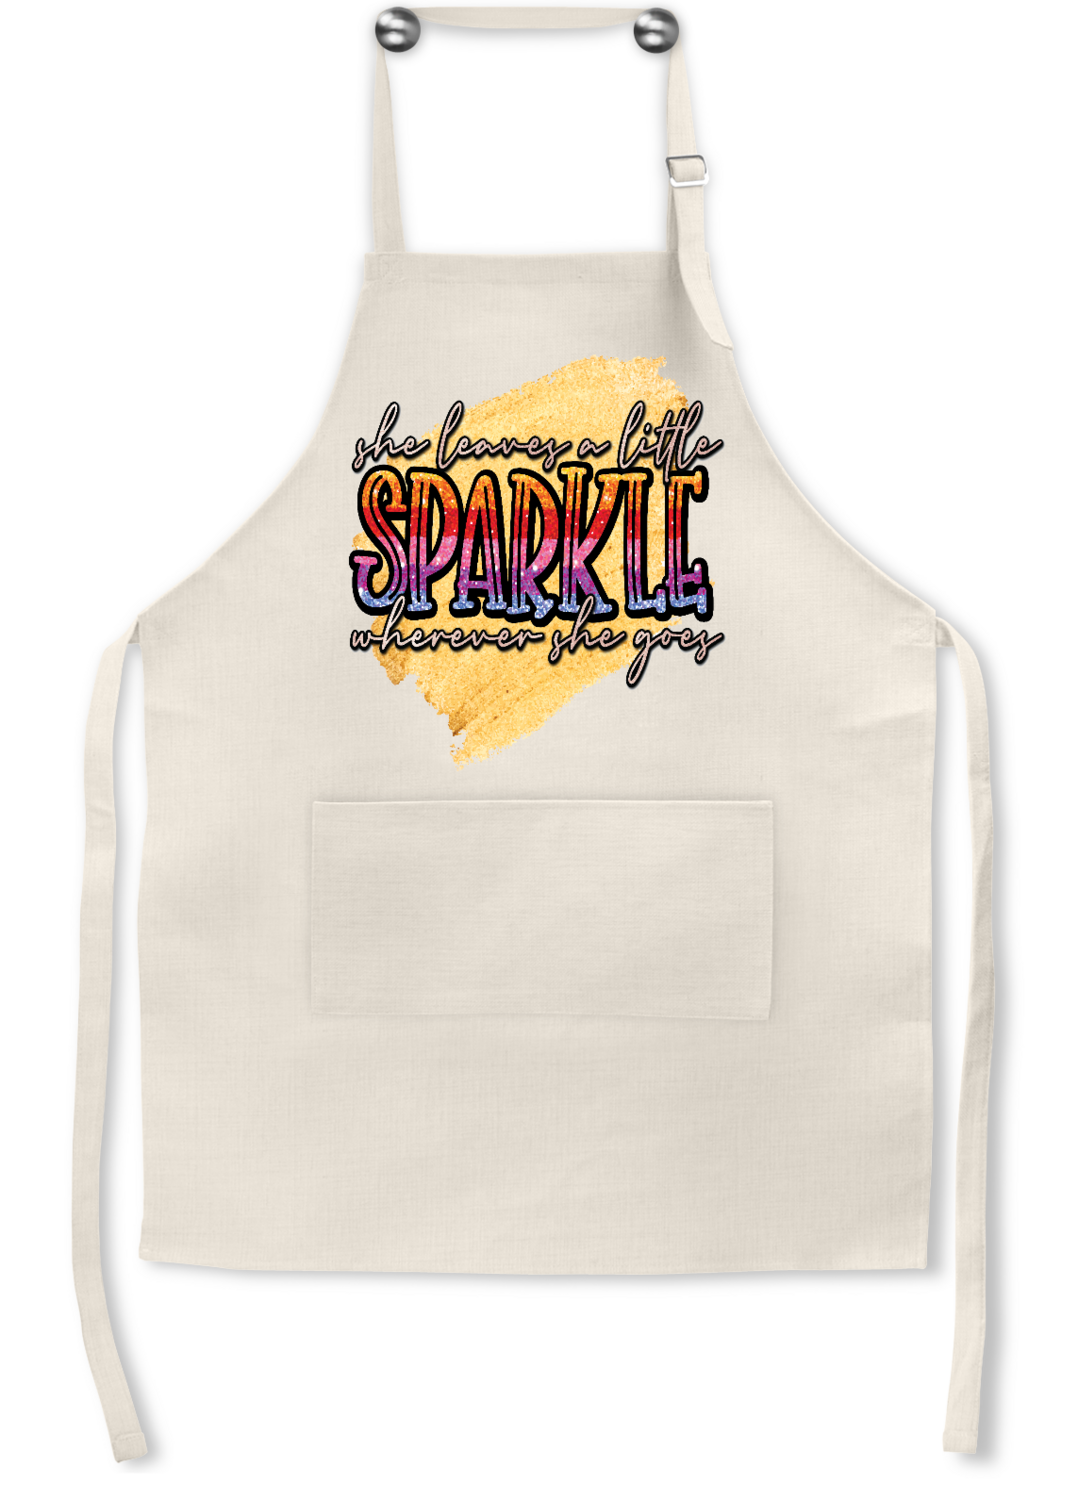 Crafting Apron: SHE LEAVES A LITTLE SPARKLE WHEREVER SHE GOES